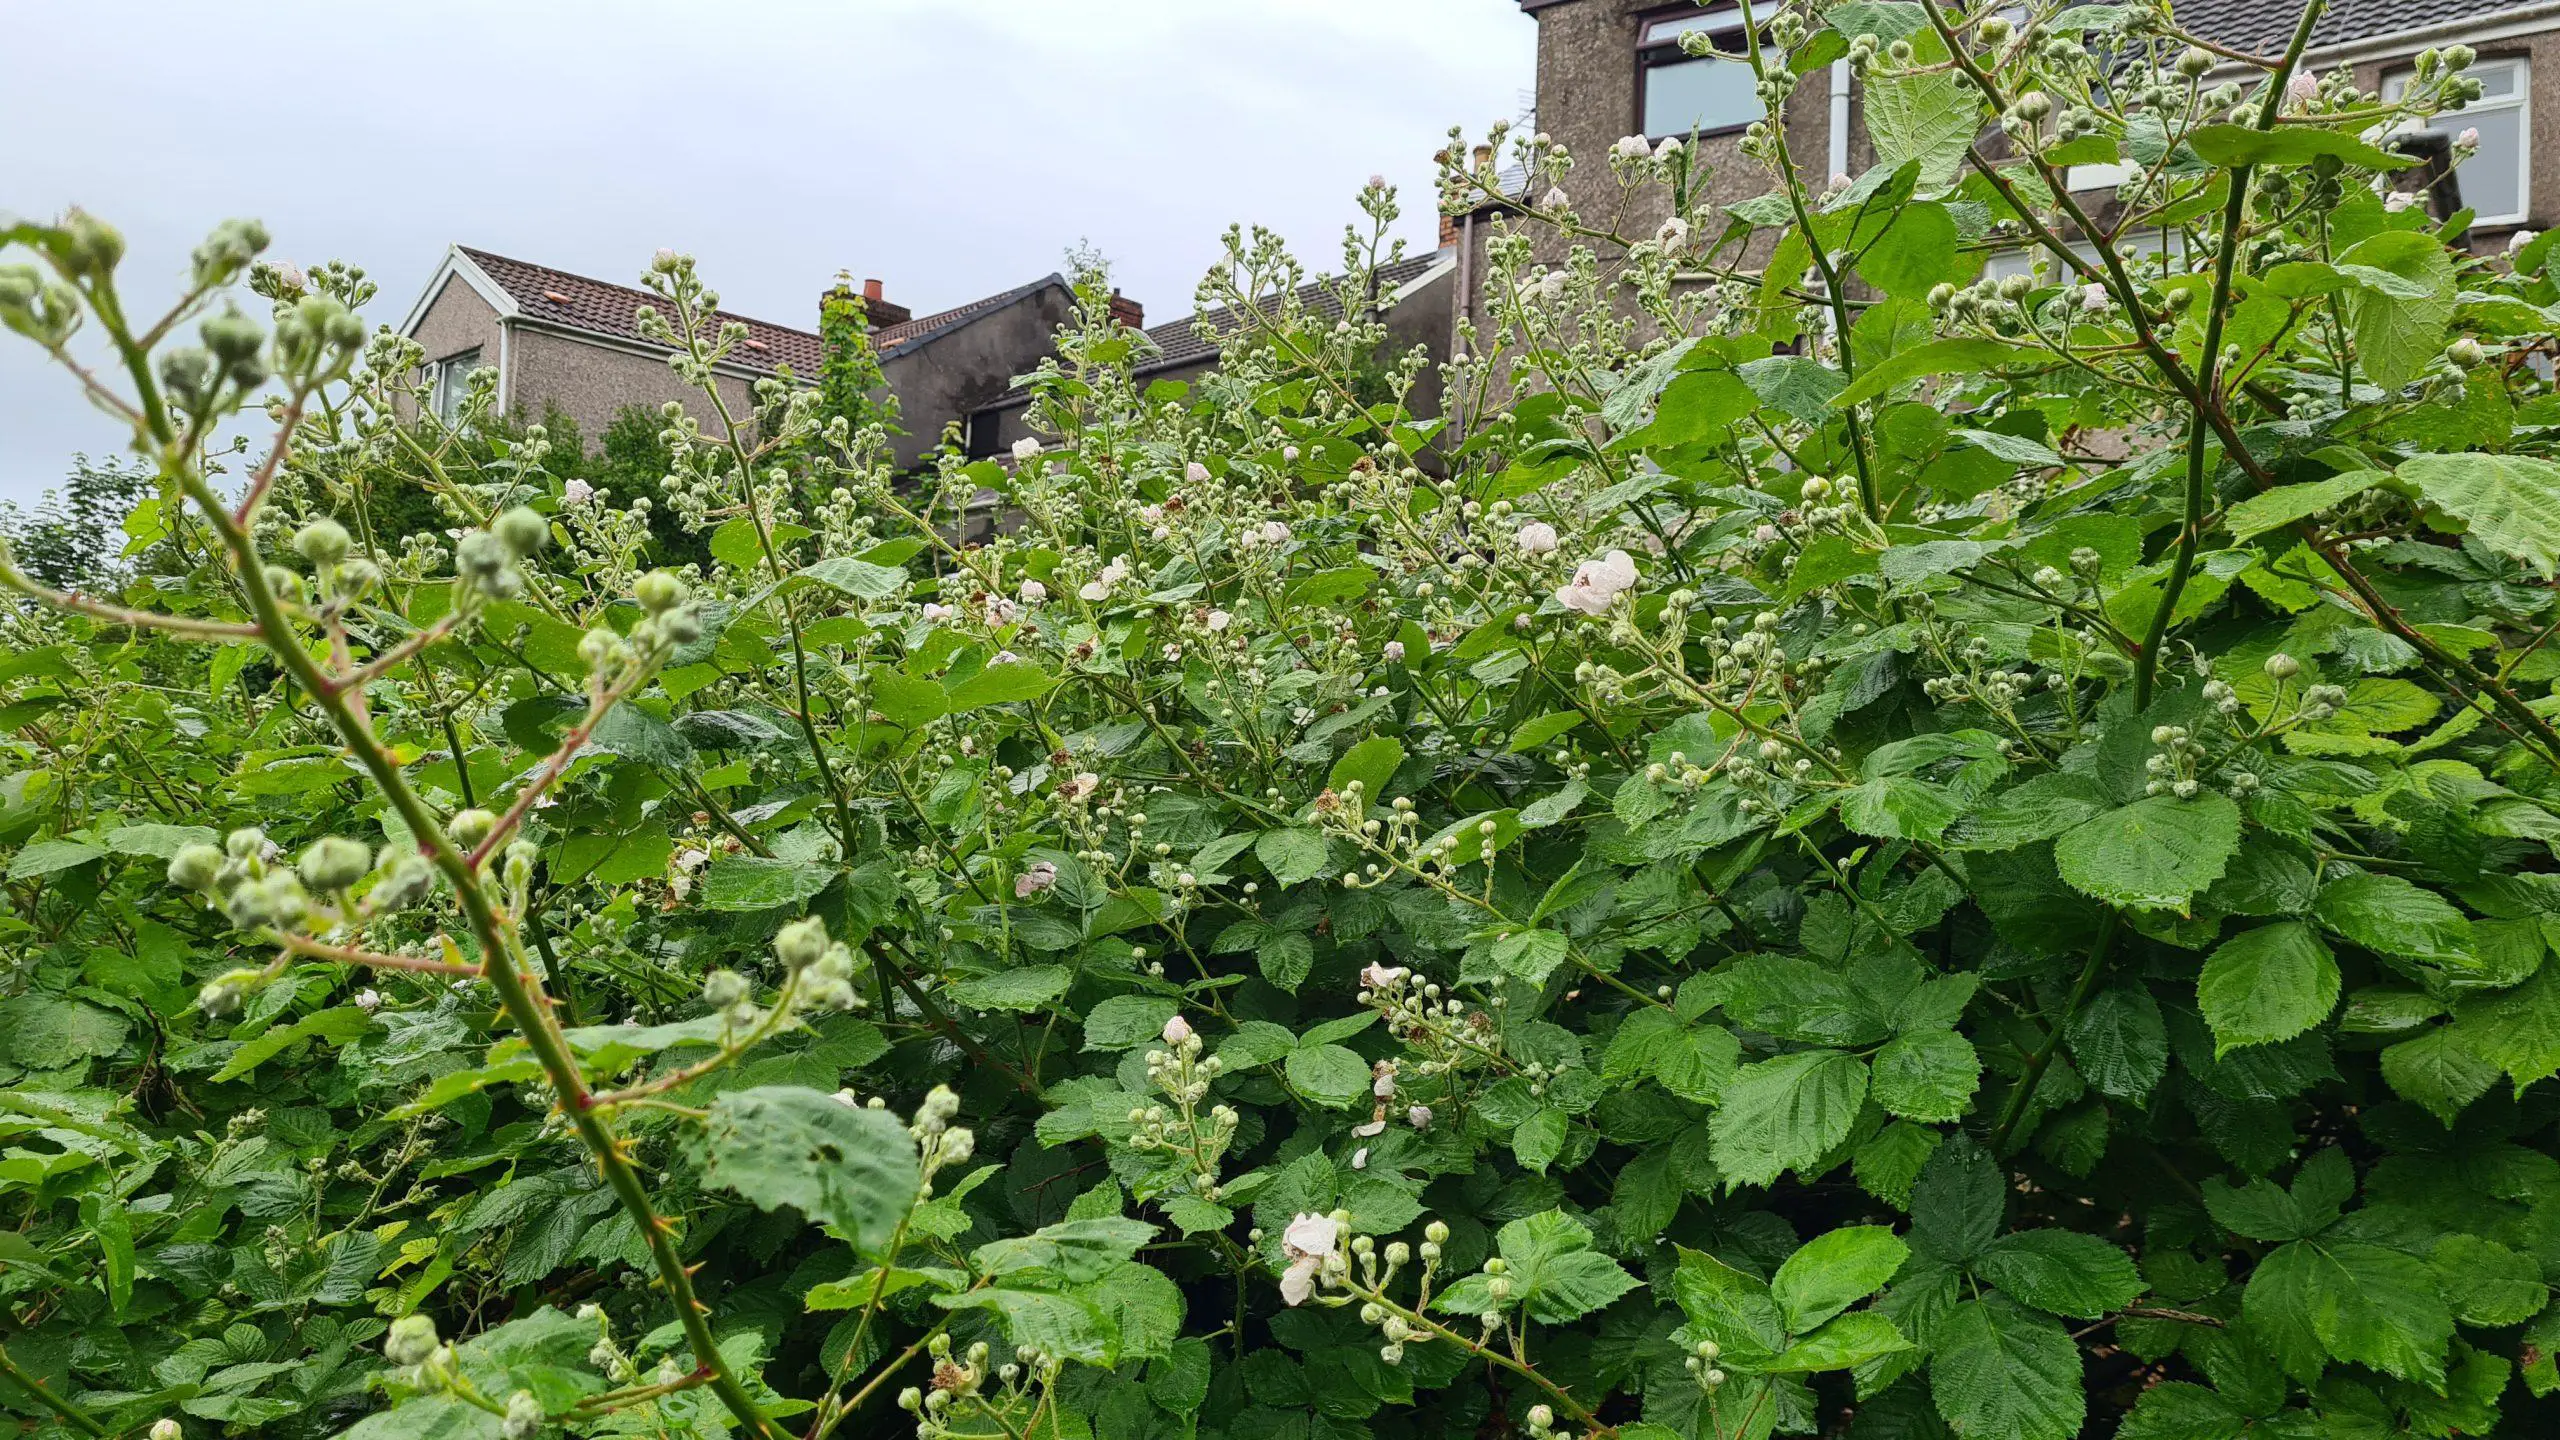 Left unchecked brambles can consume a garden and require some serious removal intervention